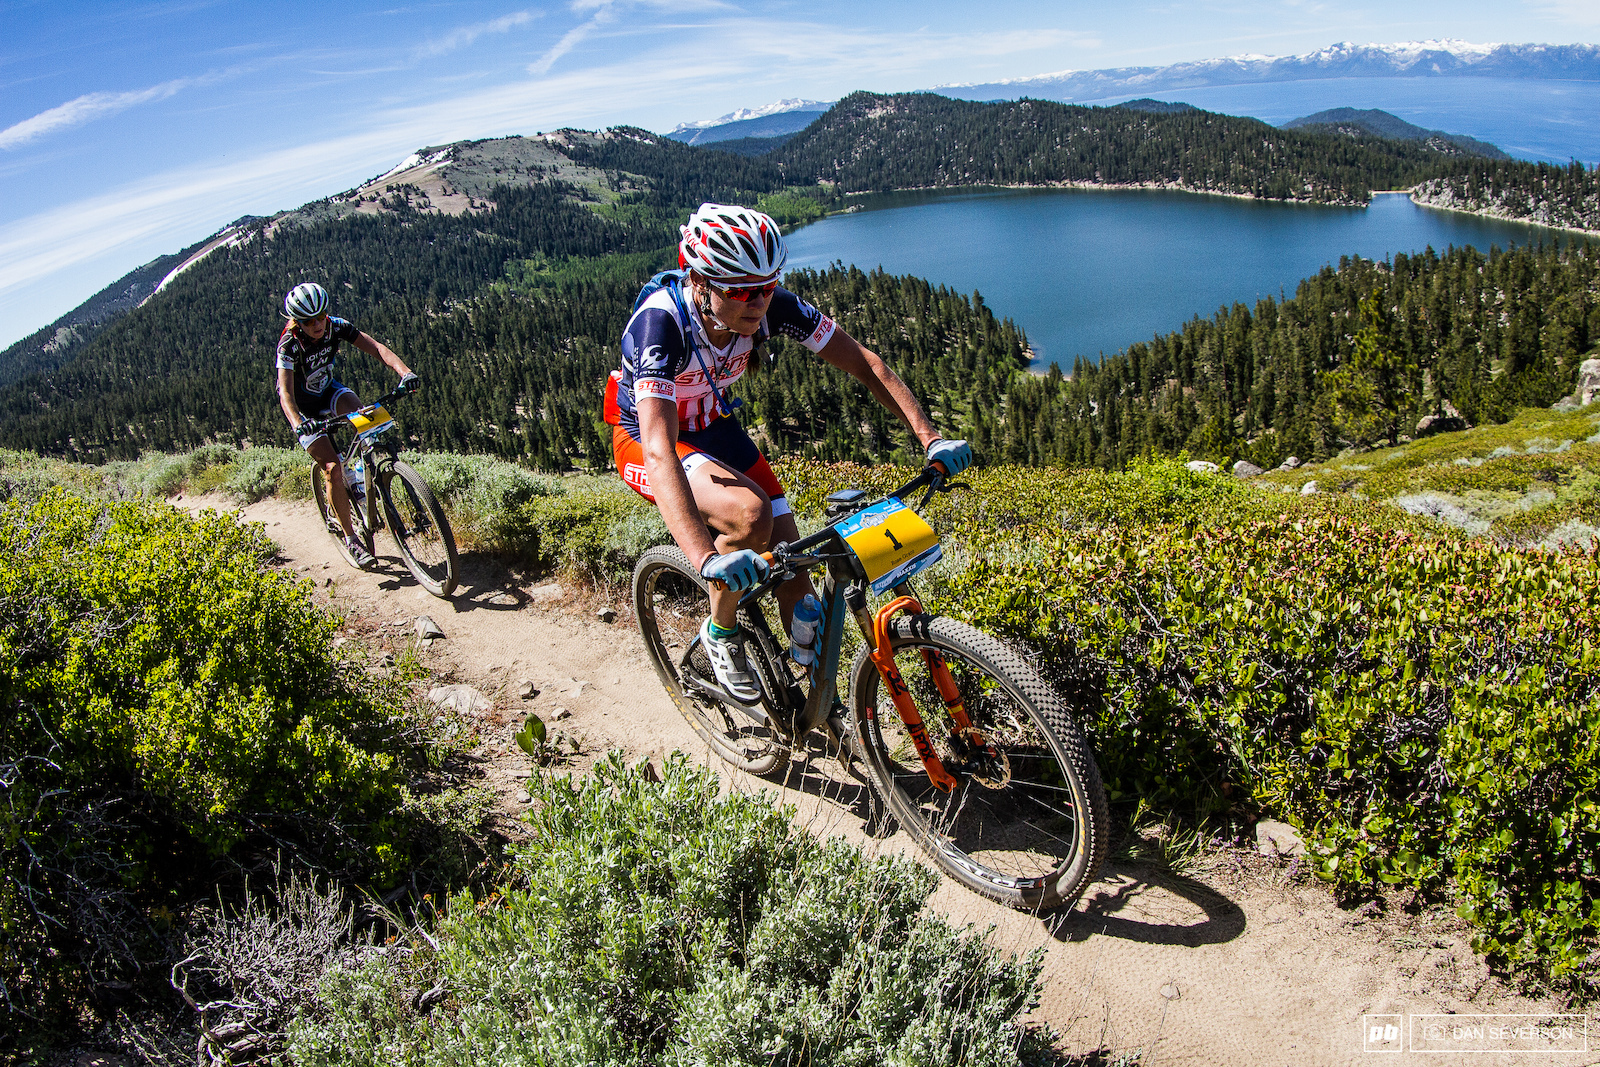 Rose Grant and Amy Beisel battle it out on one of the highest peaks of the course. It is a long and steep climb from the base of Marlette Lake seen below .